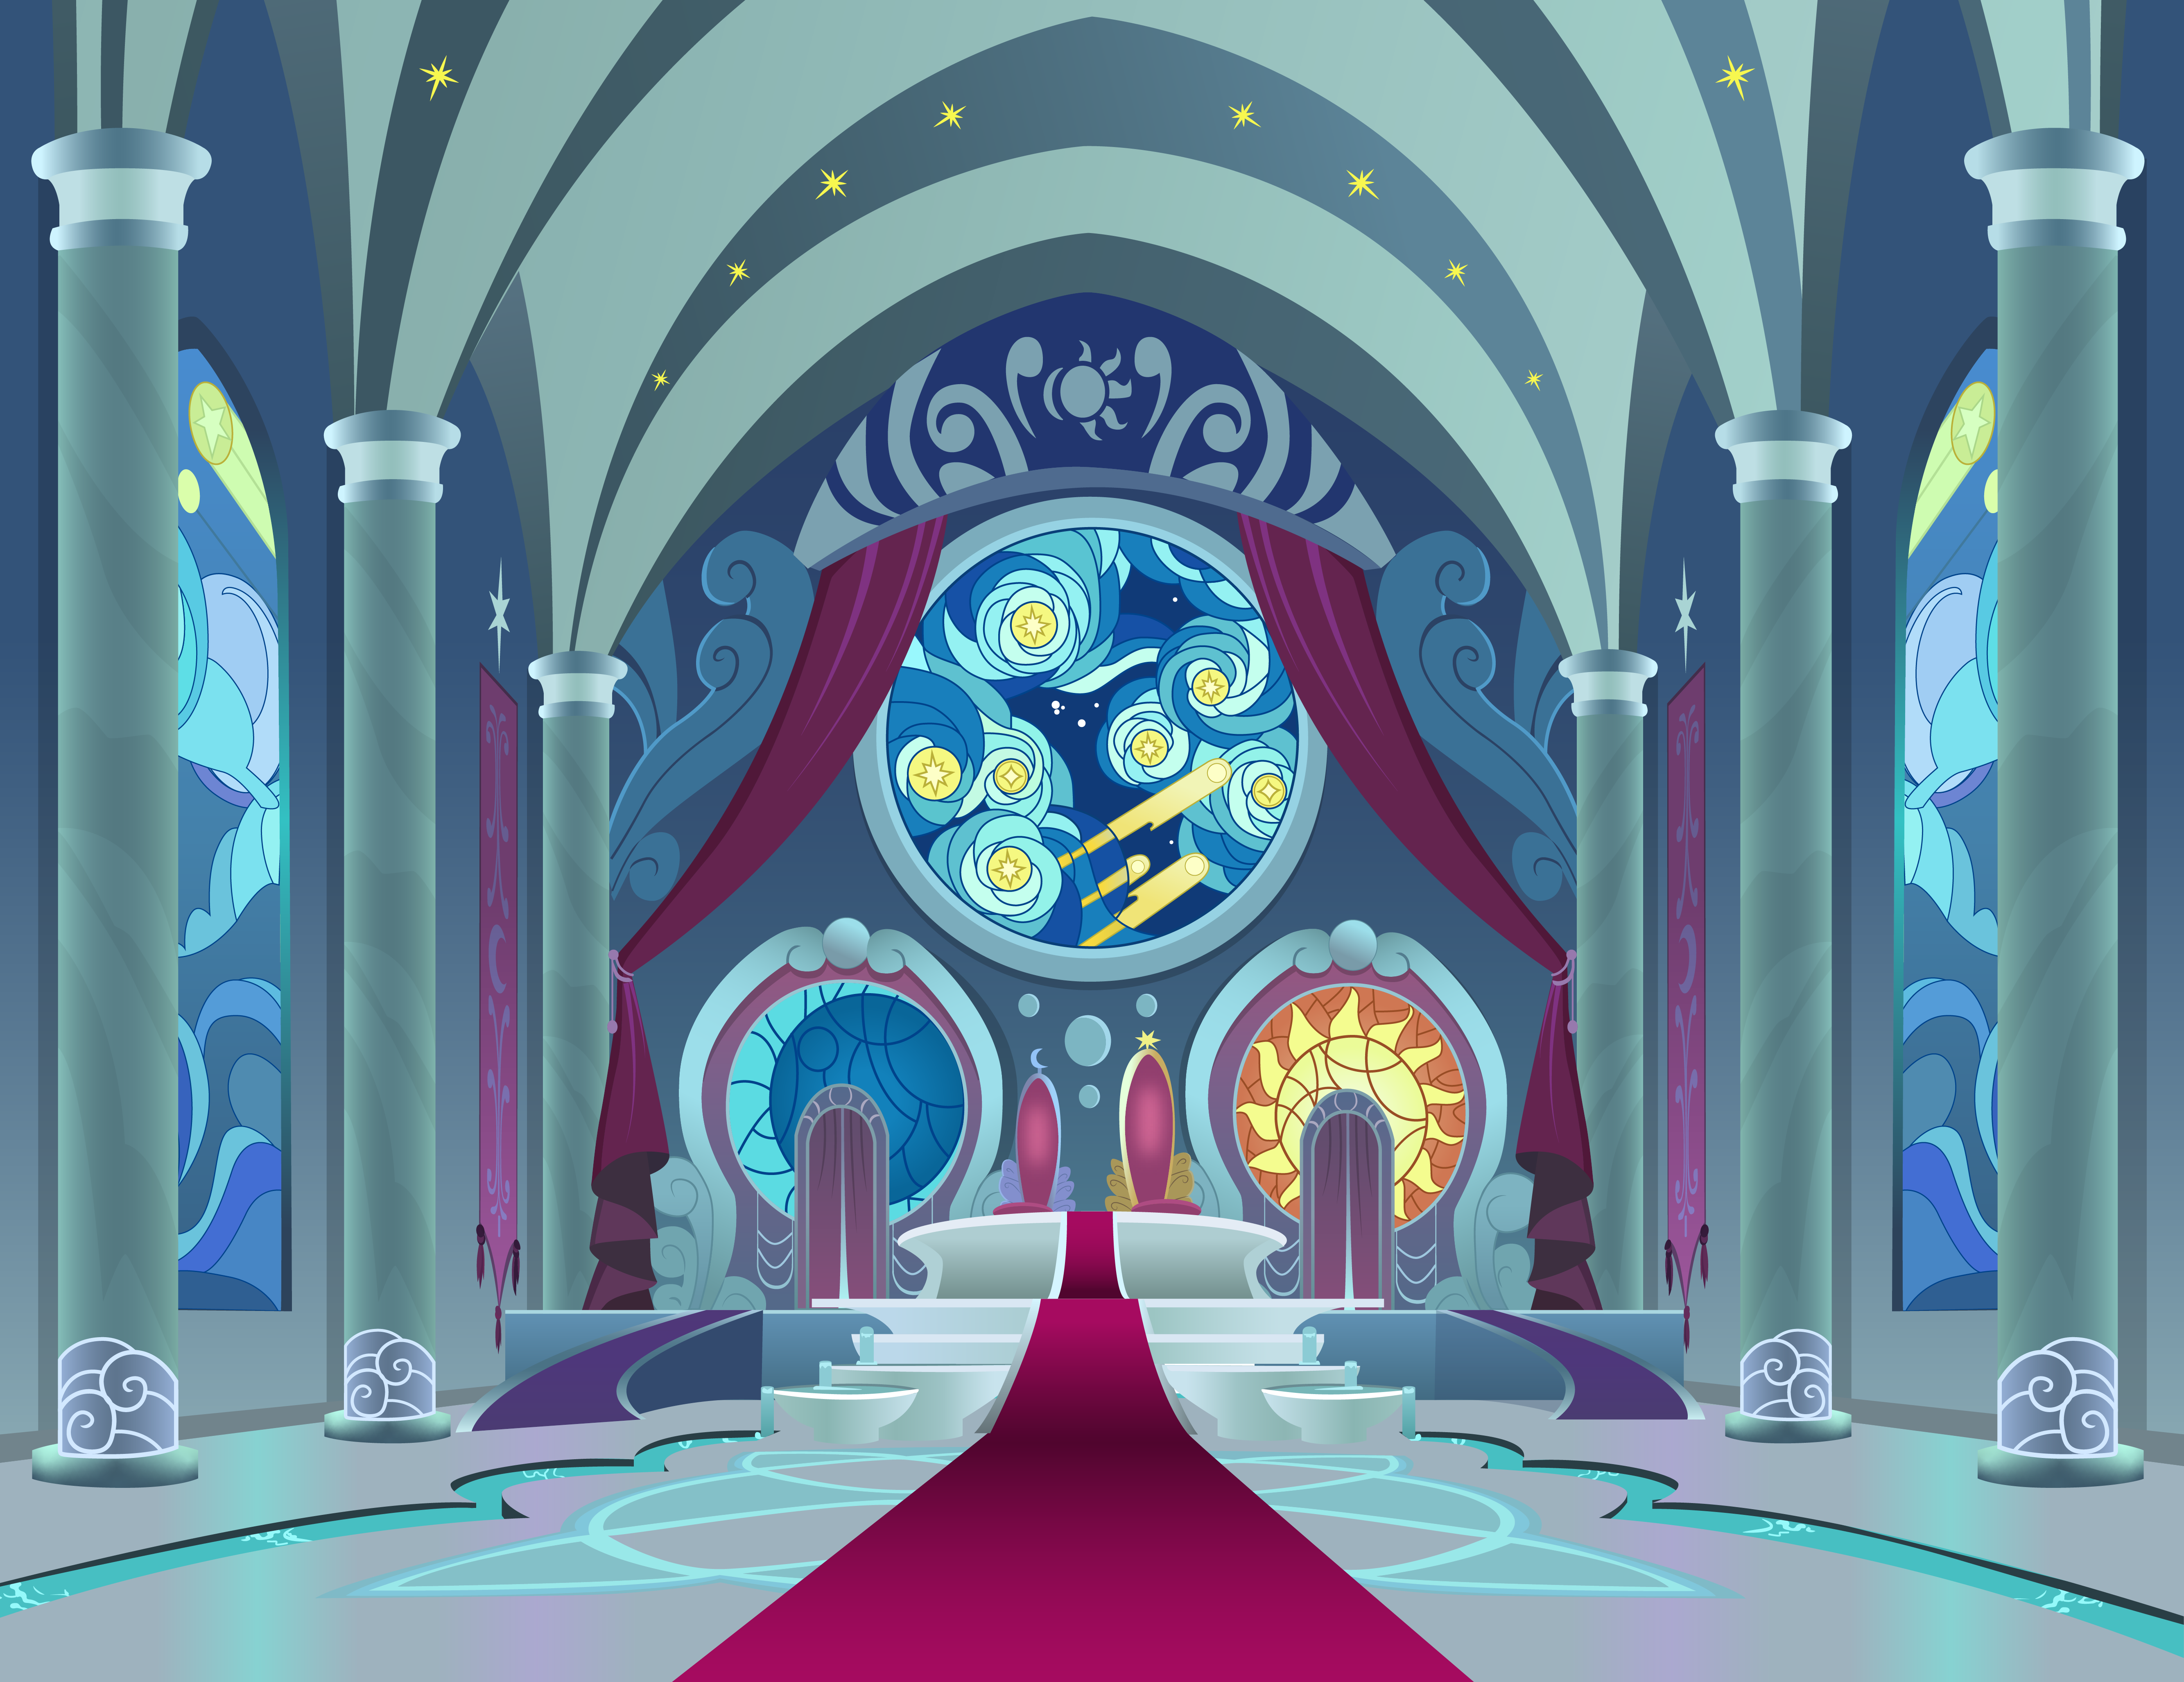 New Royal Throne Room by MLP-Silver-Quill on DeviantArt